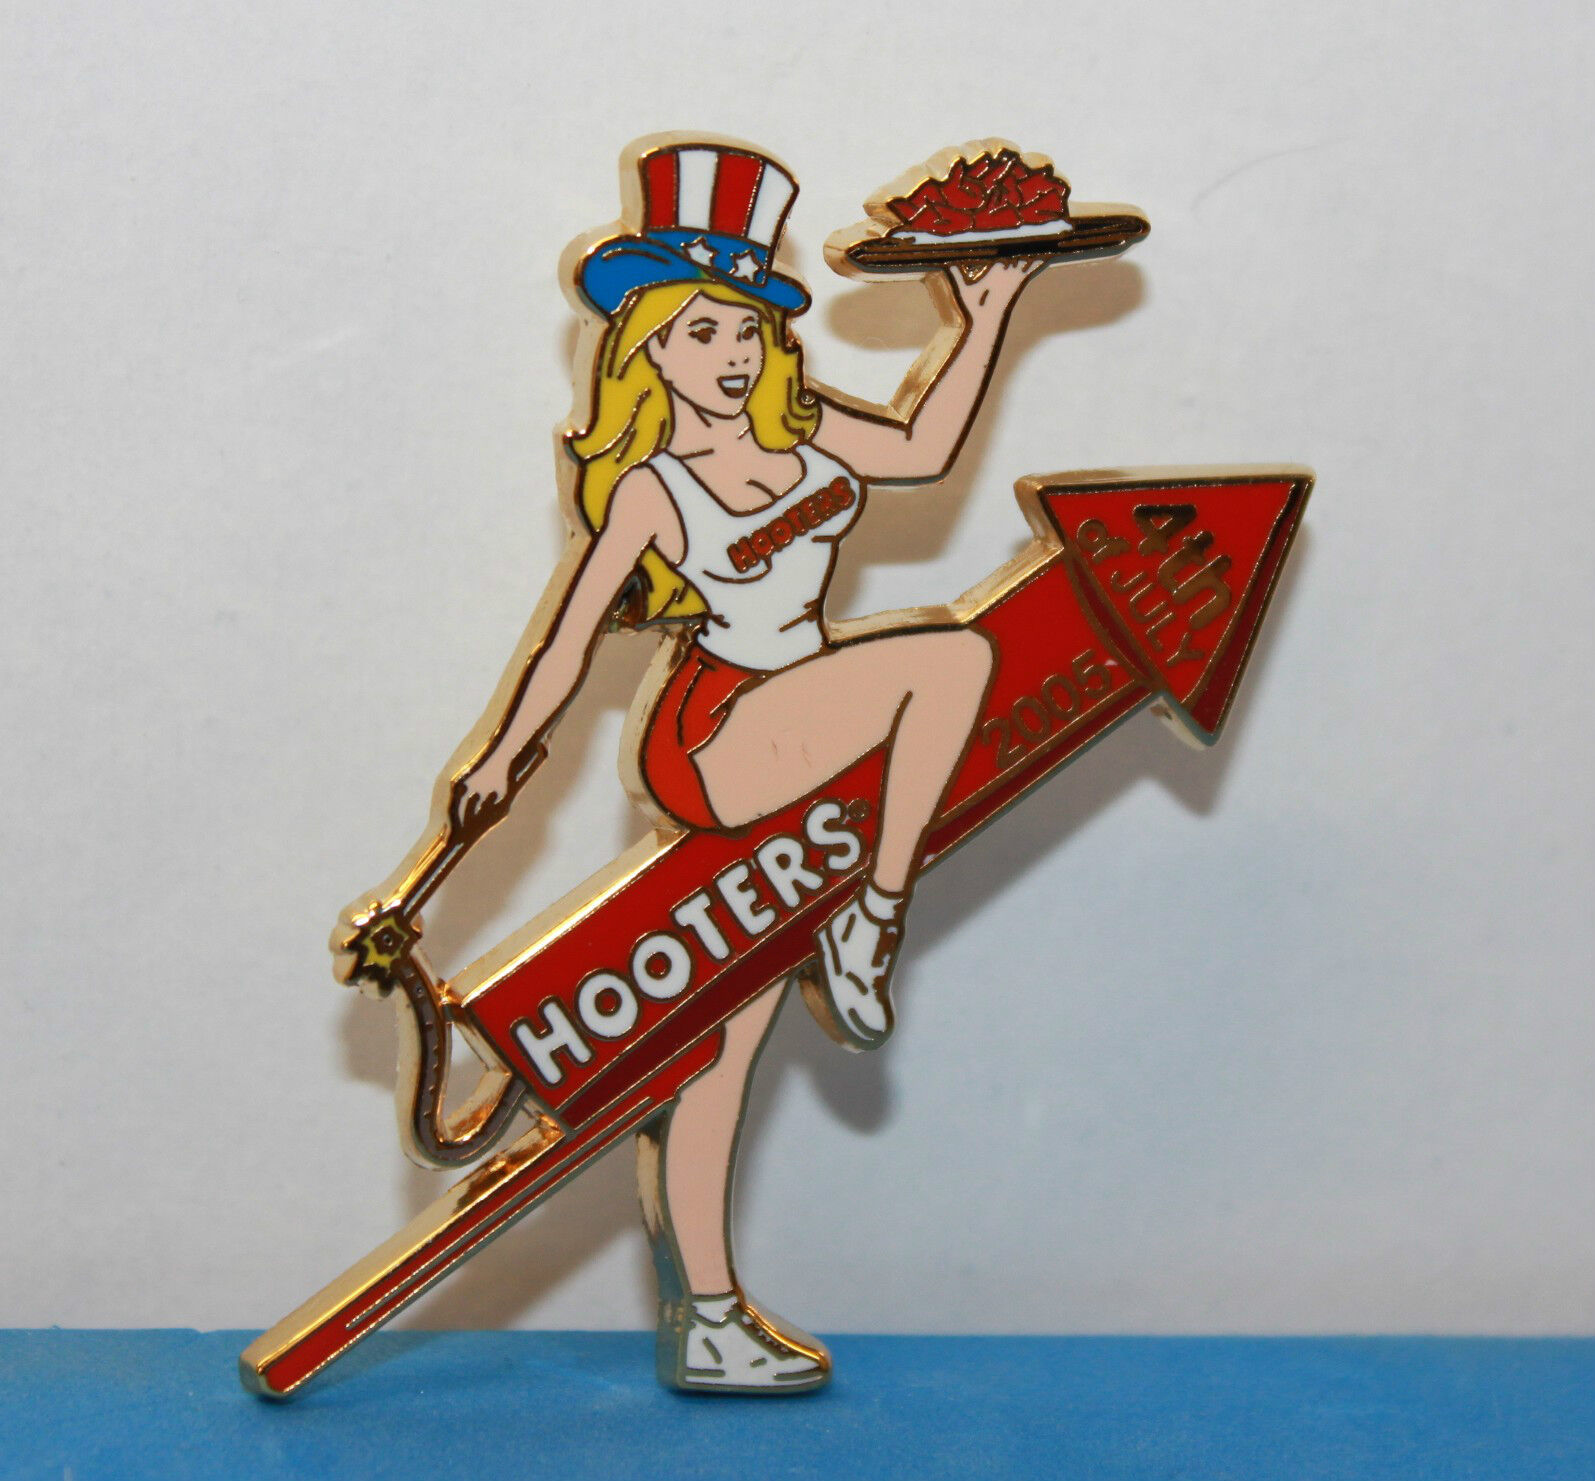 HOOTERS FIRECRACKER GIRL 2005 4th OF JULY HOLIDAY FIREWORKS WITH WINGS LAPEL PIN